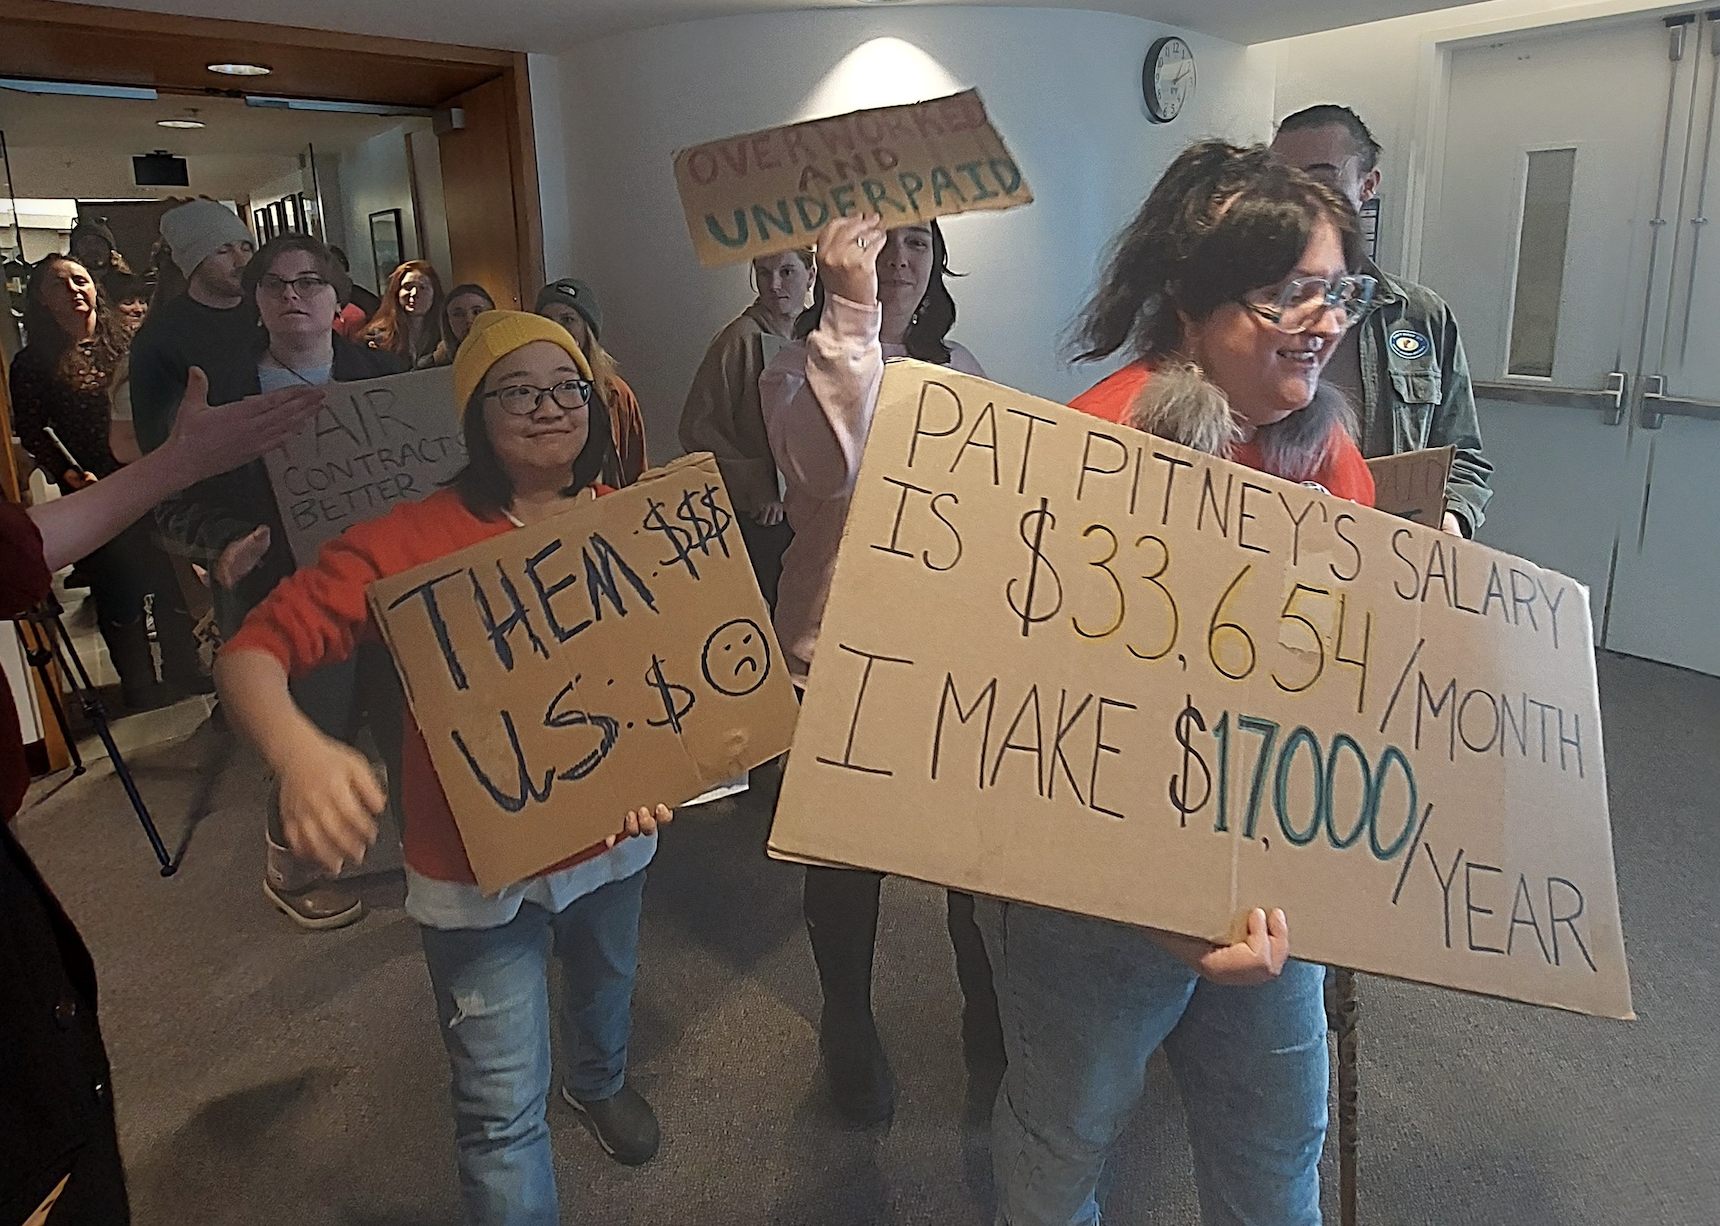 Two AGWA members leading a long line of workers in an indoor hallway. Many workers are holding signs, and one sign in the front says “Pat Pitney’s Salary is $33,654/month. I make $17,000/year.” 